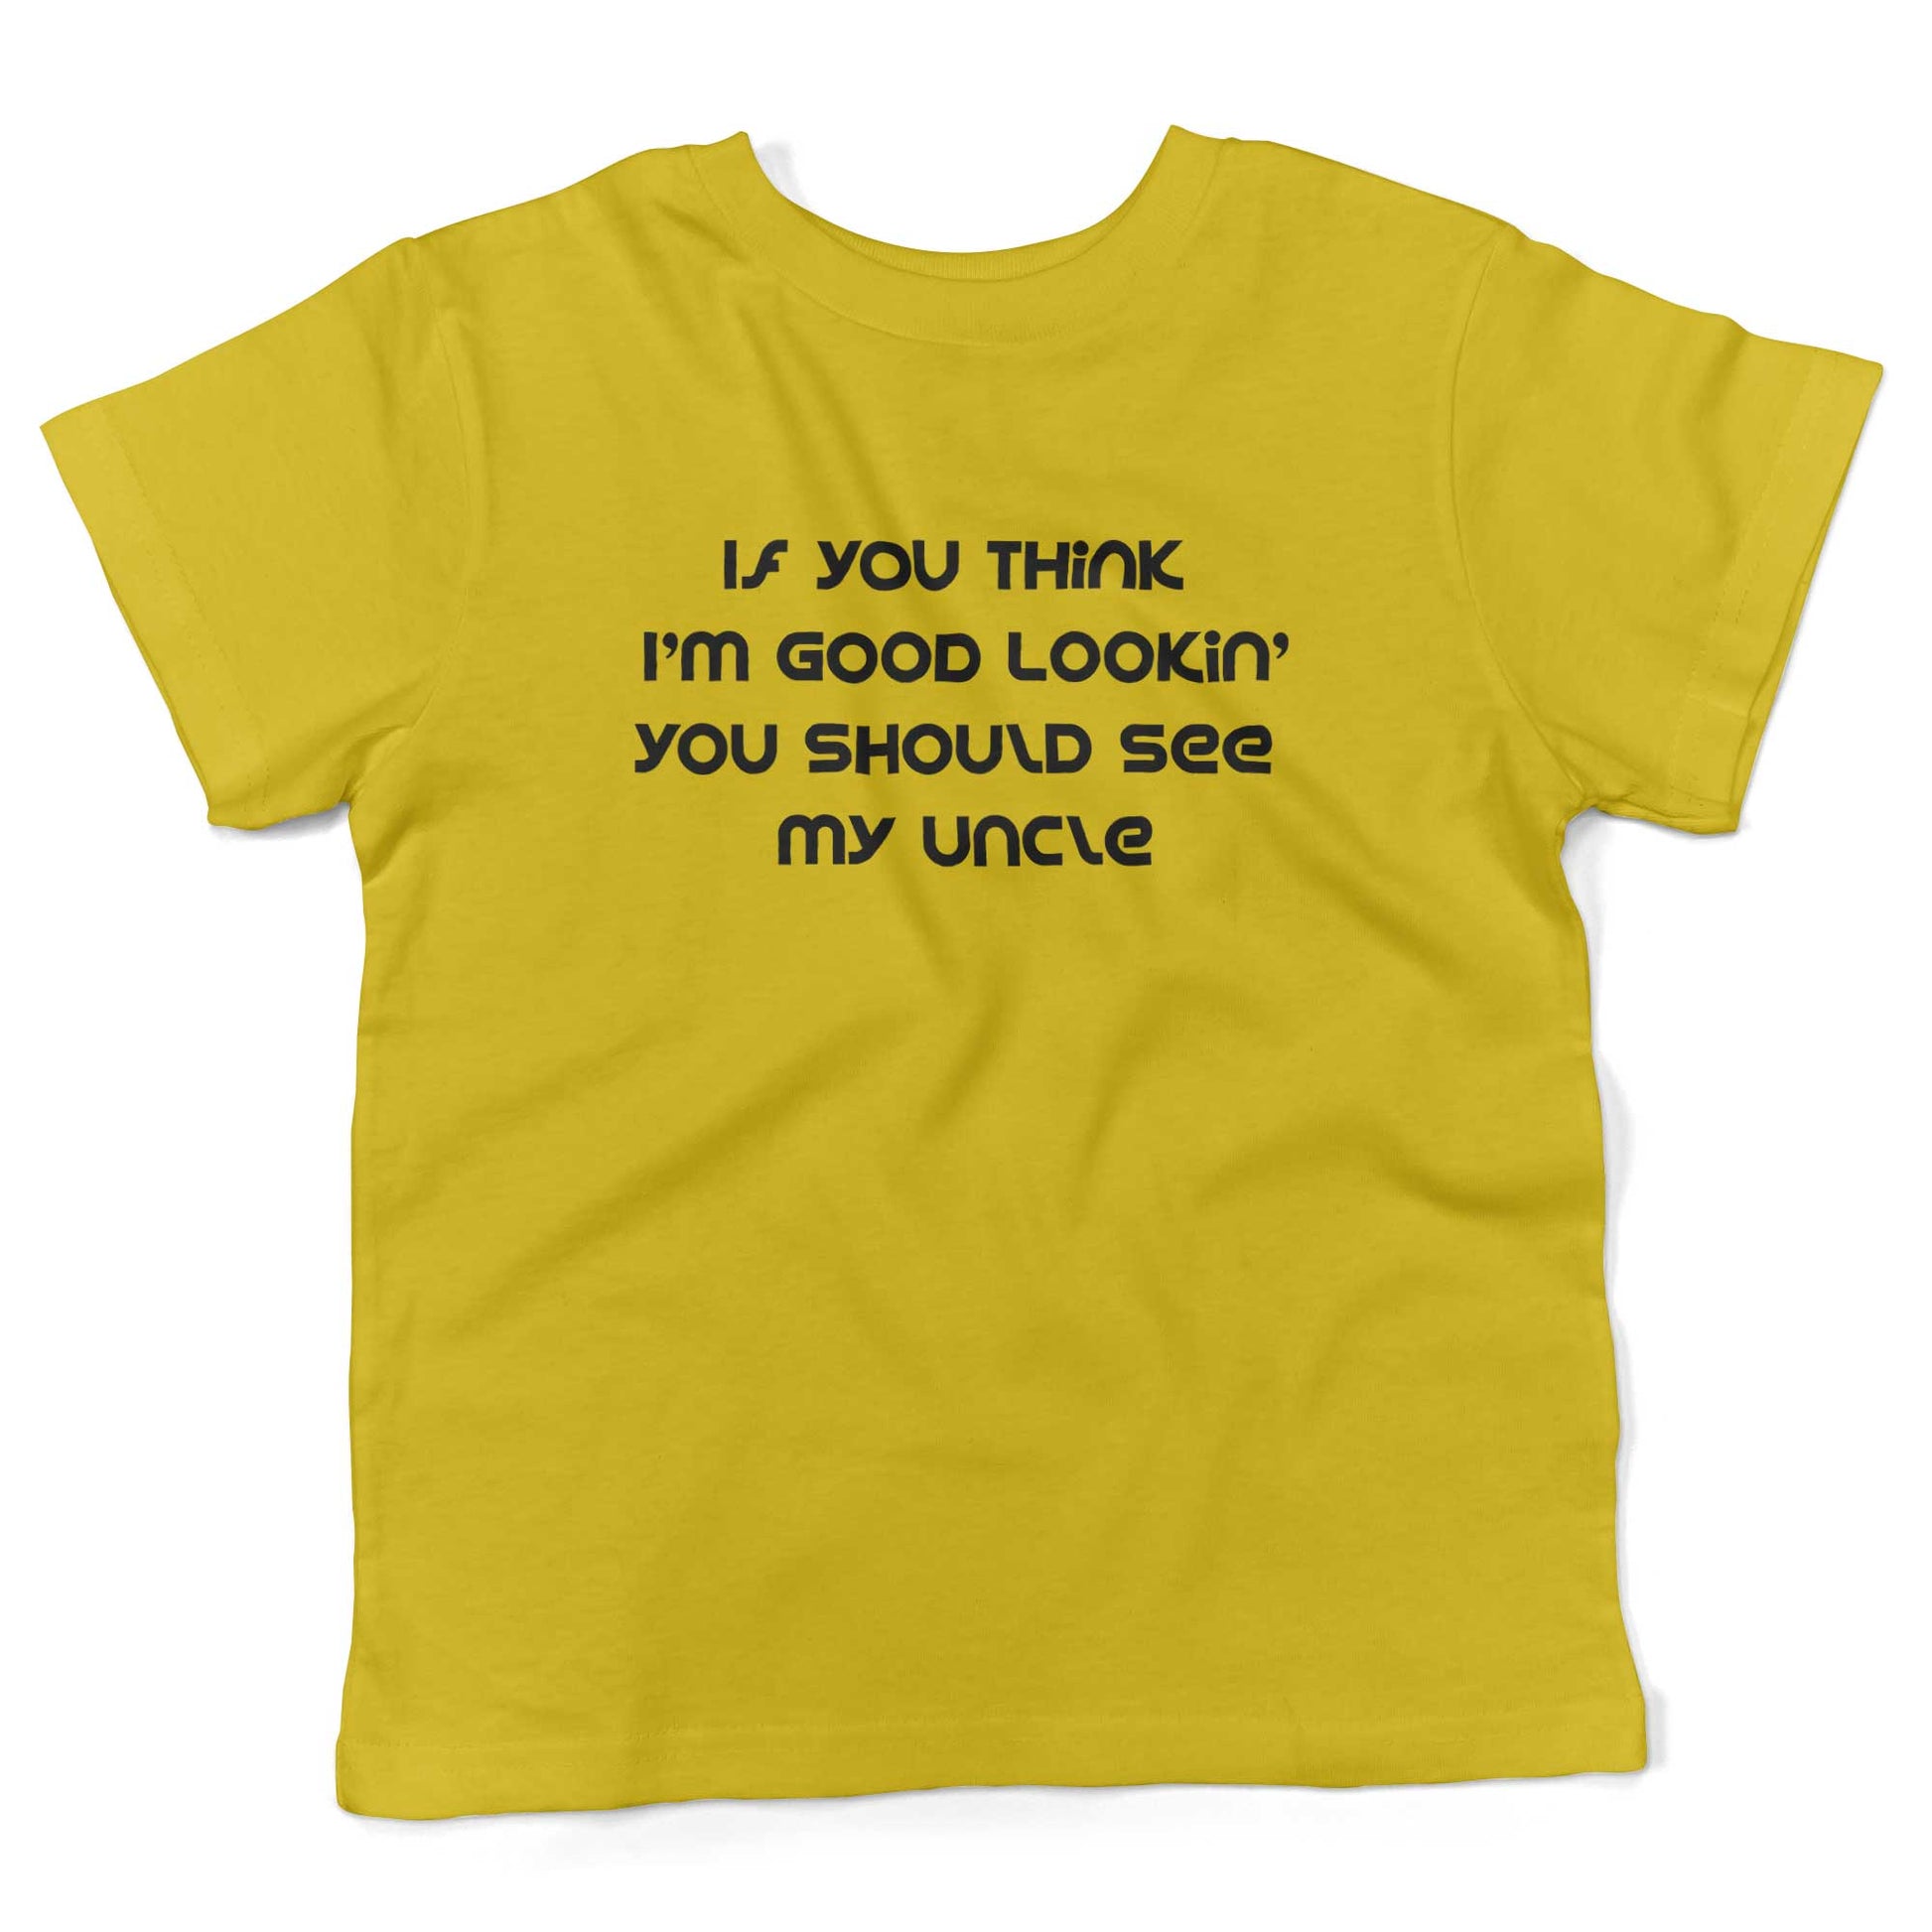 If You Think I'm Good Lookin' You Should See My Uncle Toddler Shirt-Sunshine Yellow-2T